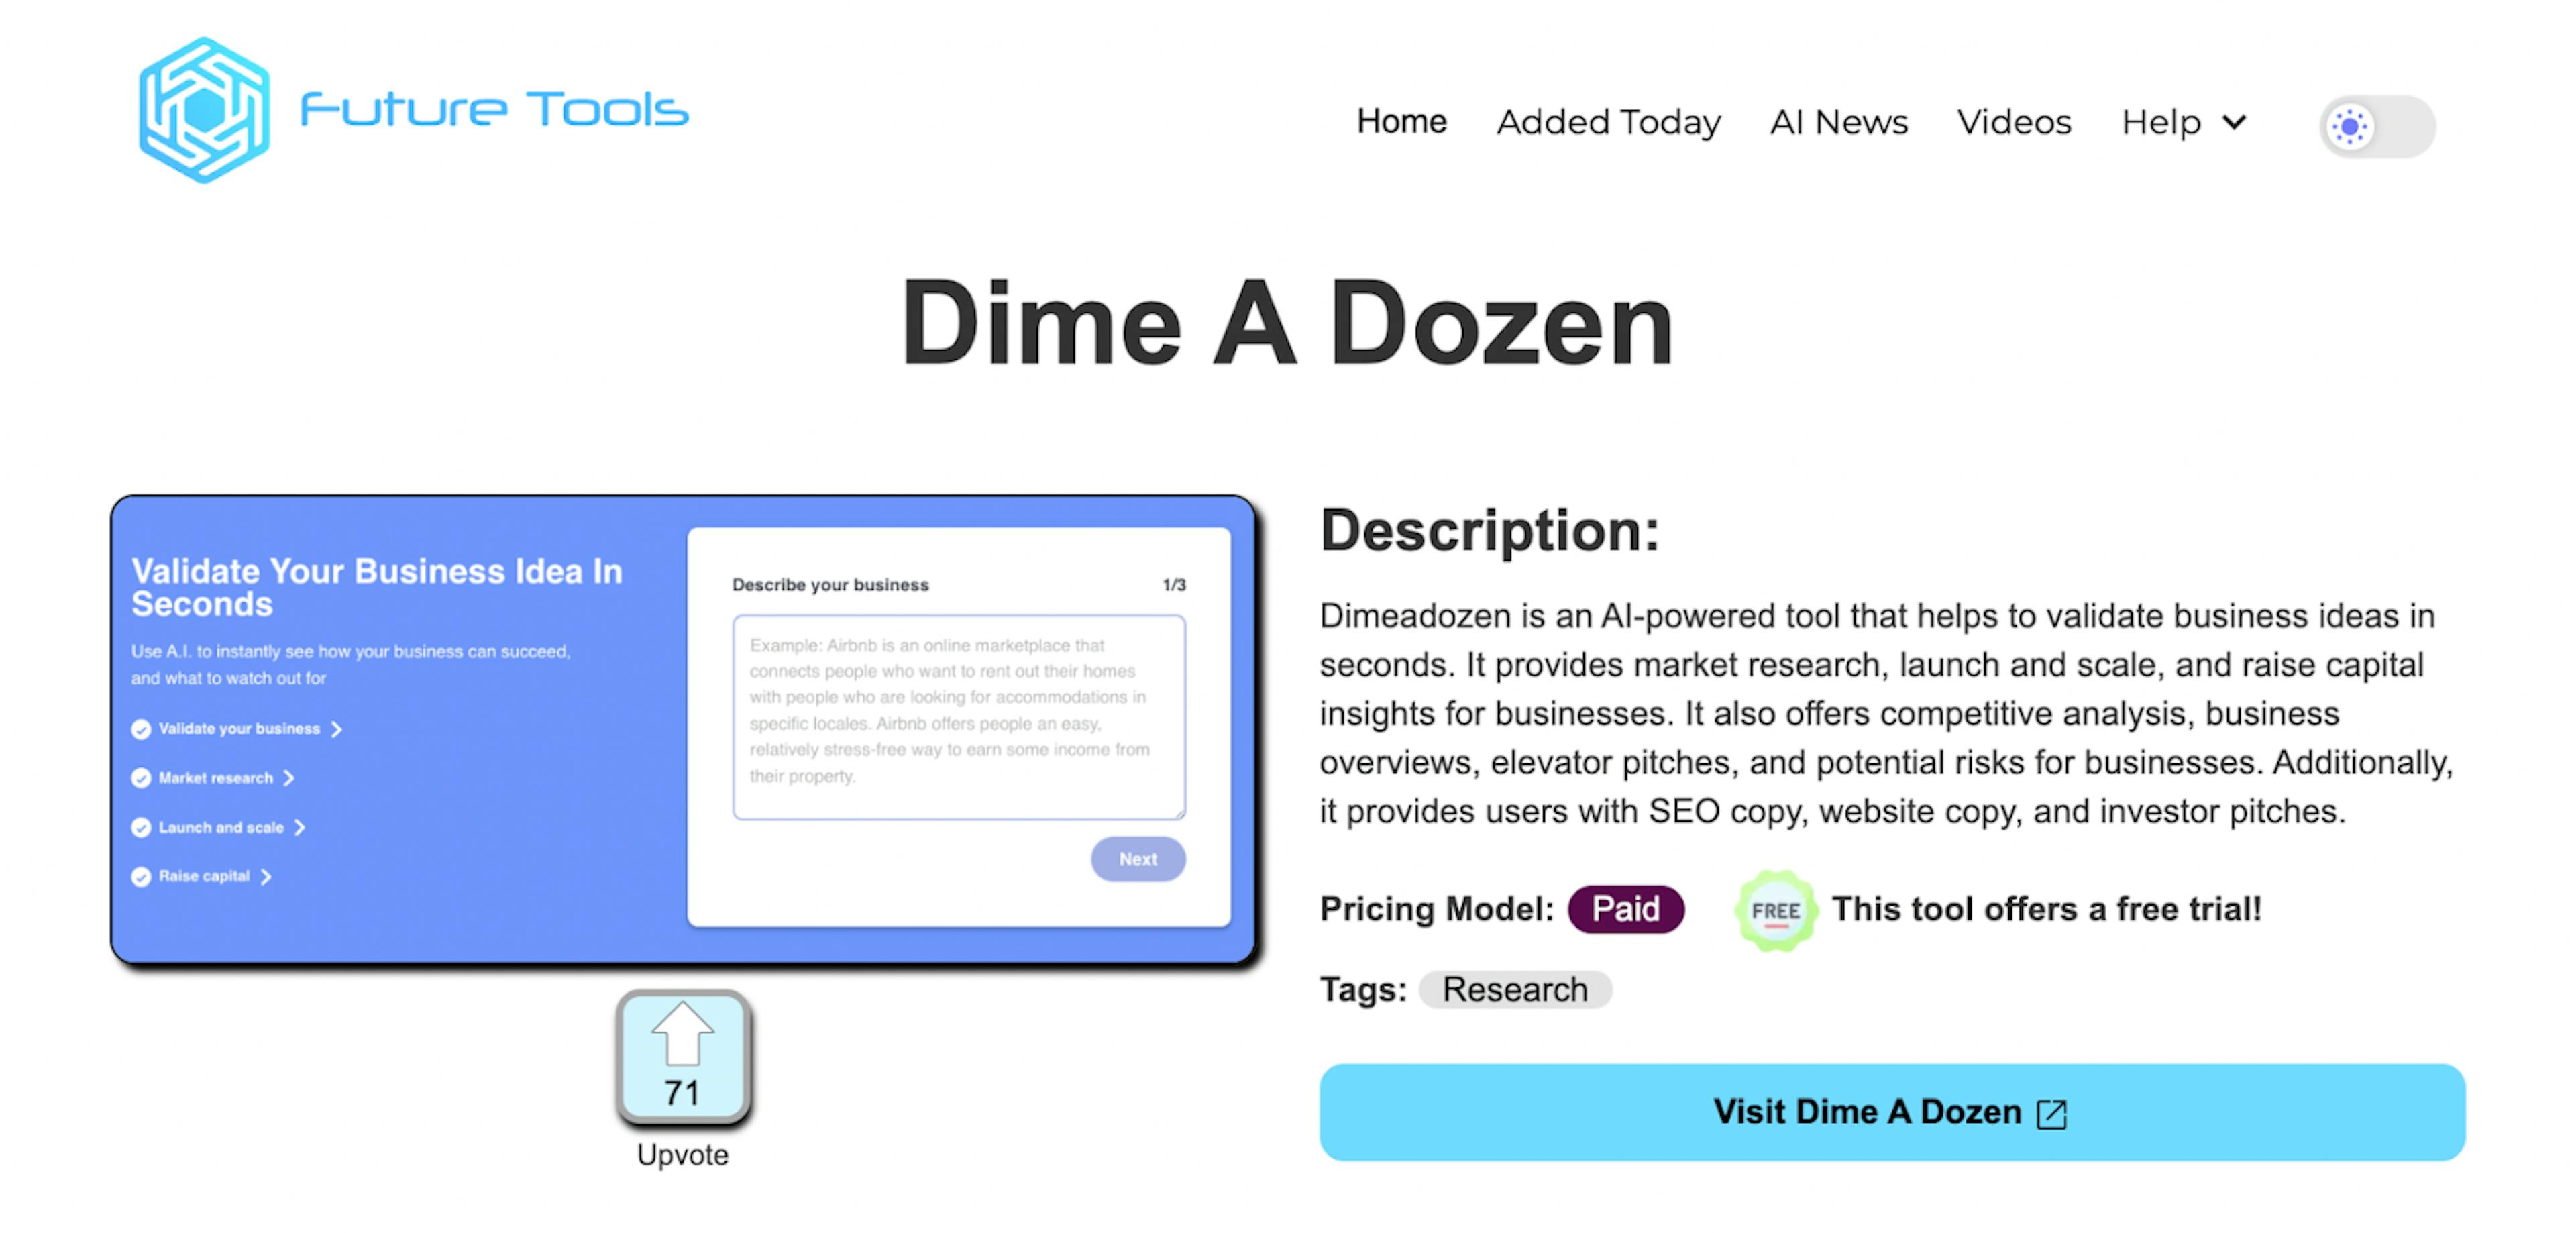 Dime A Dozen page at Future Tools website